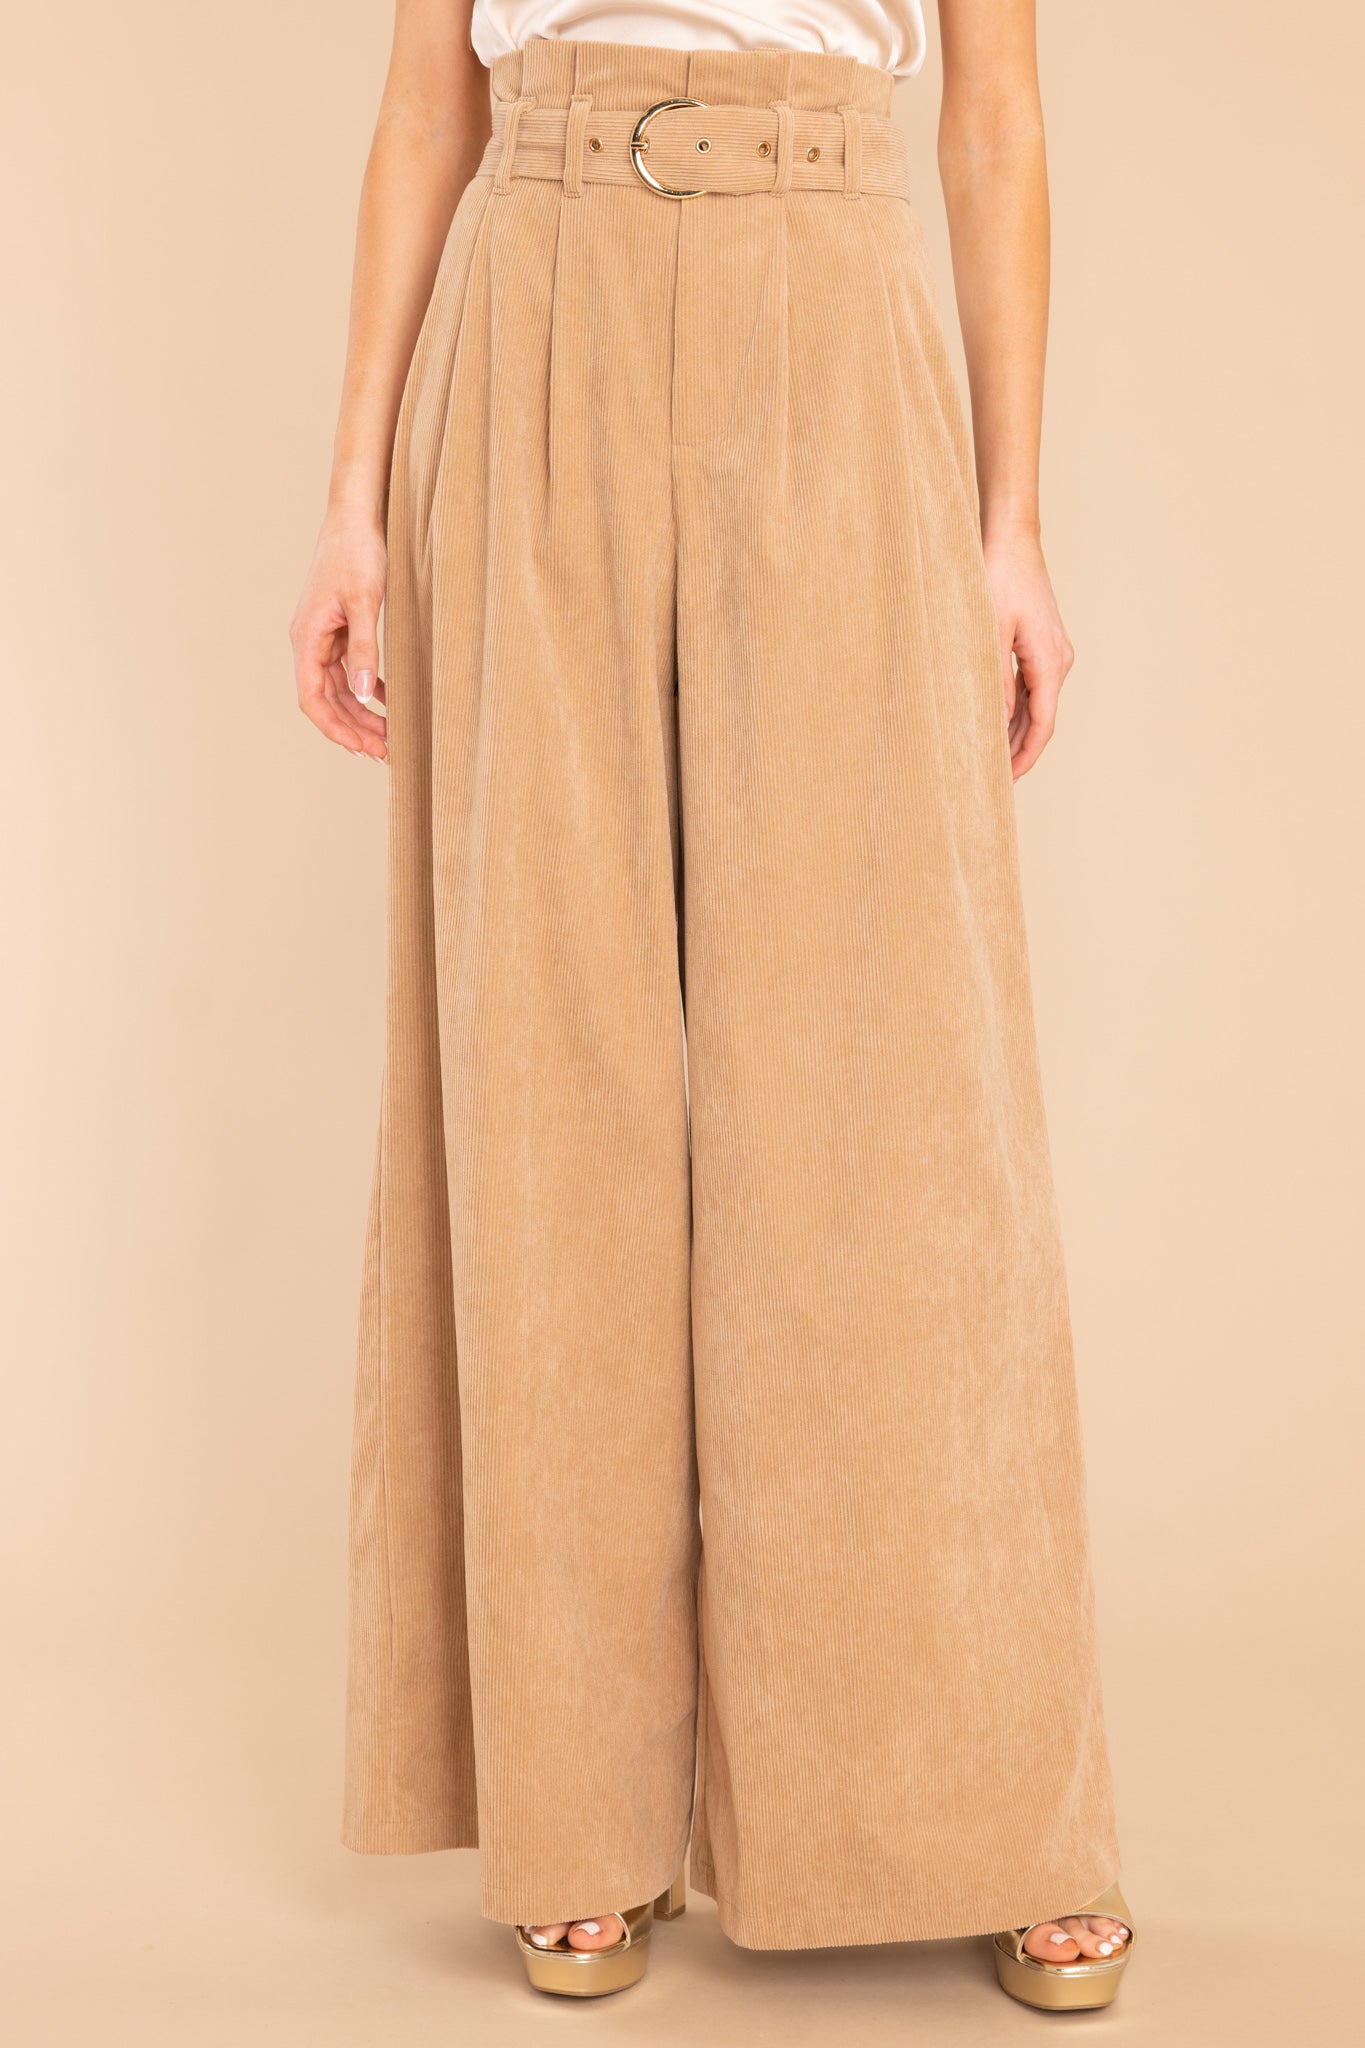 Front view of these pants that feature a paper bag style waistline, an adjustable belt, a zipper closure, and very flowy legs.